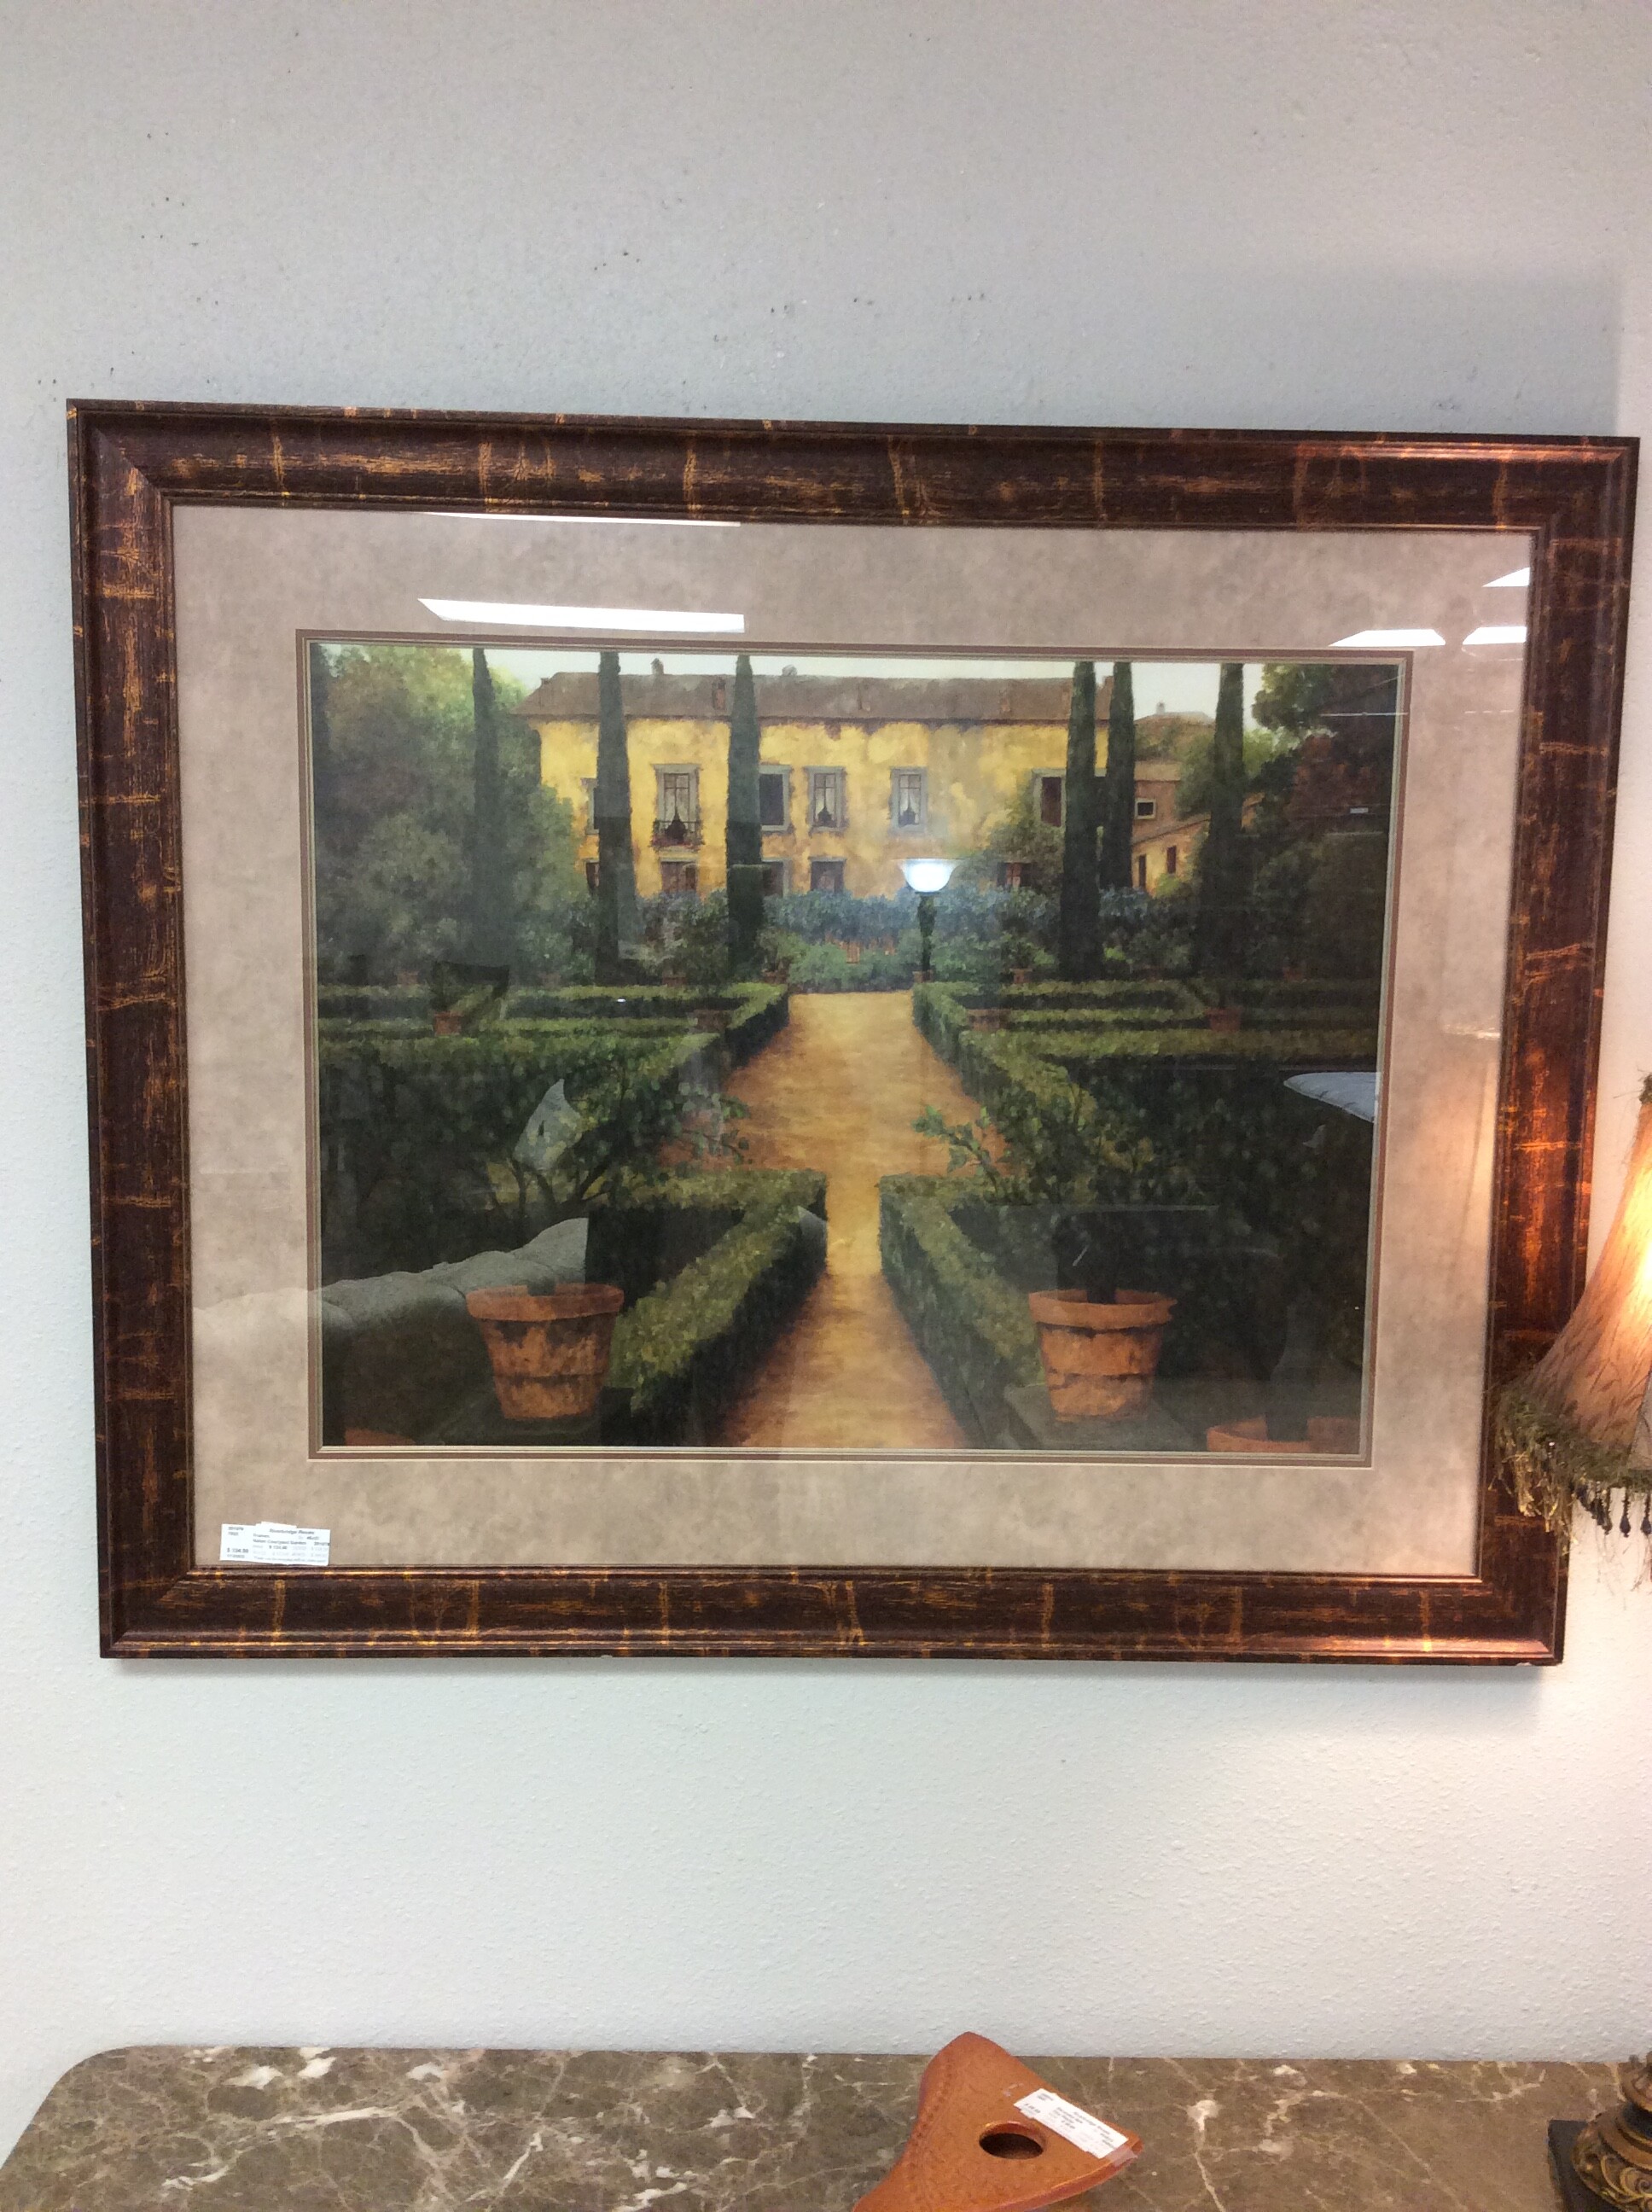 Beautifully matted and framed.